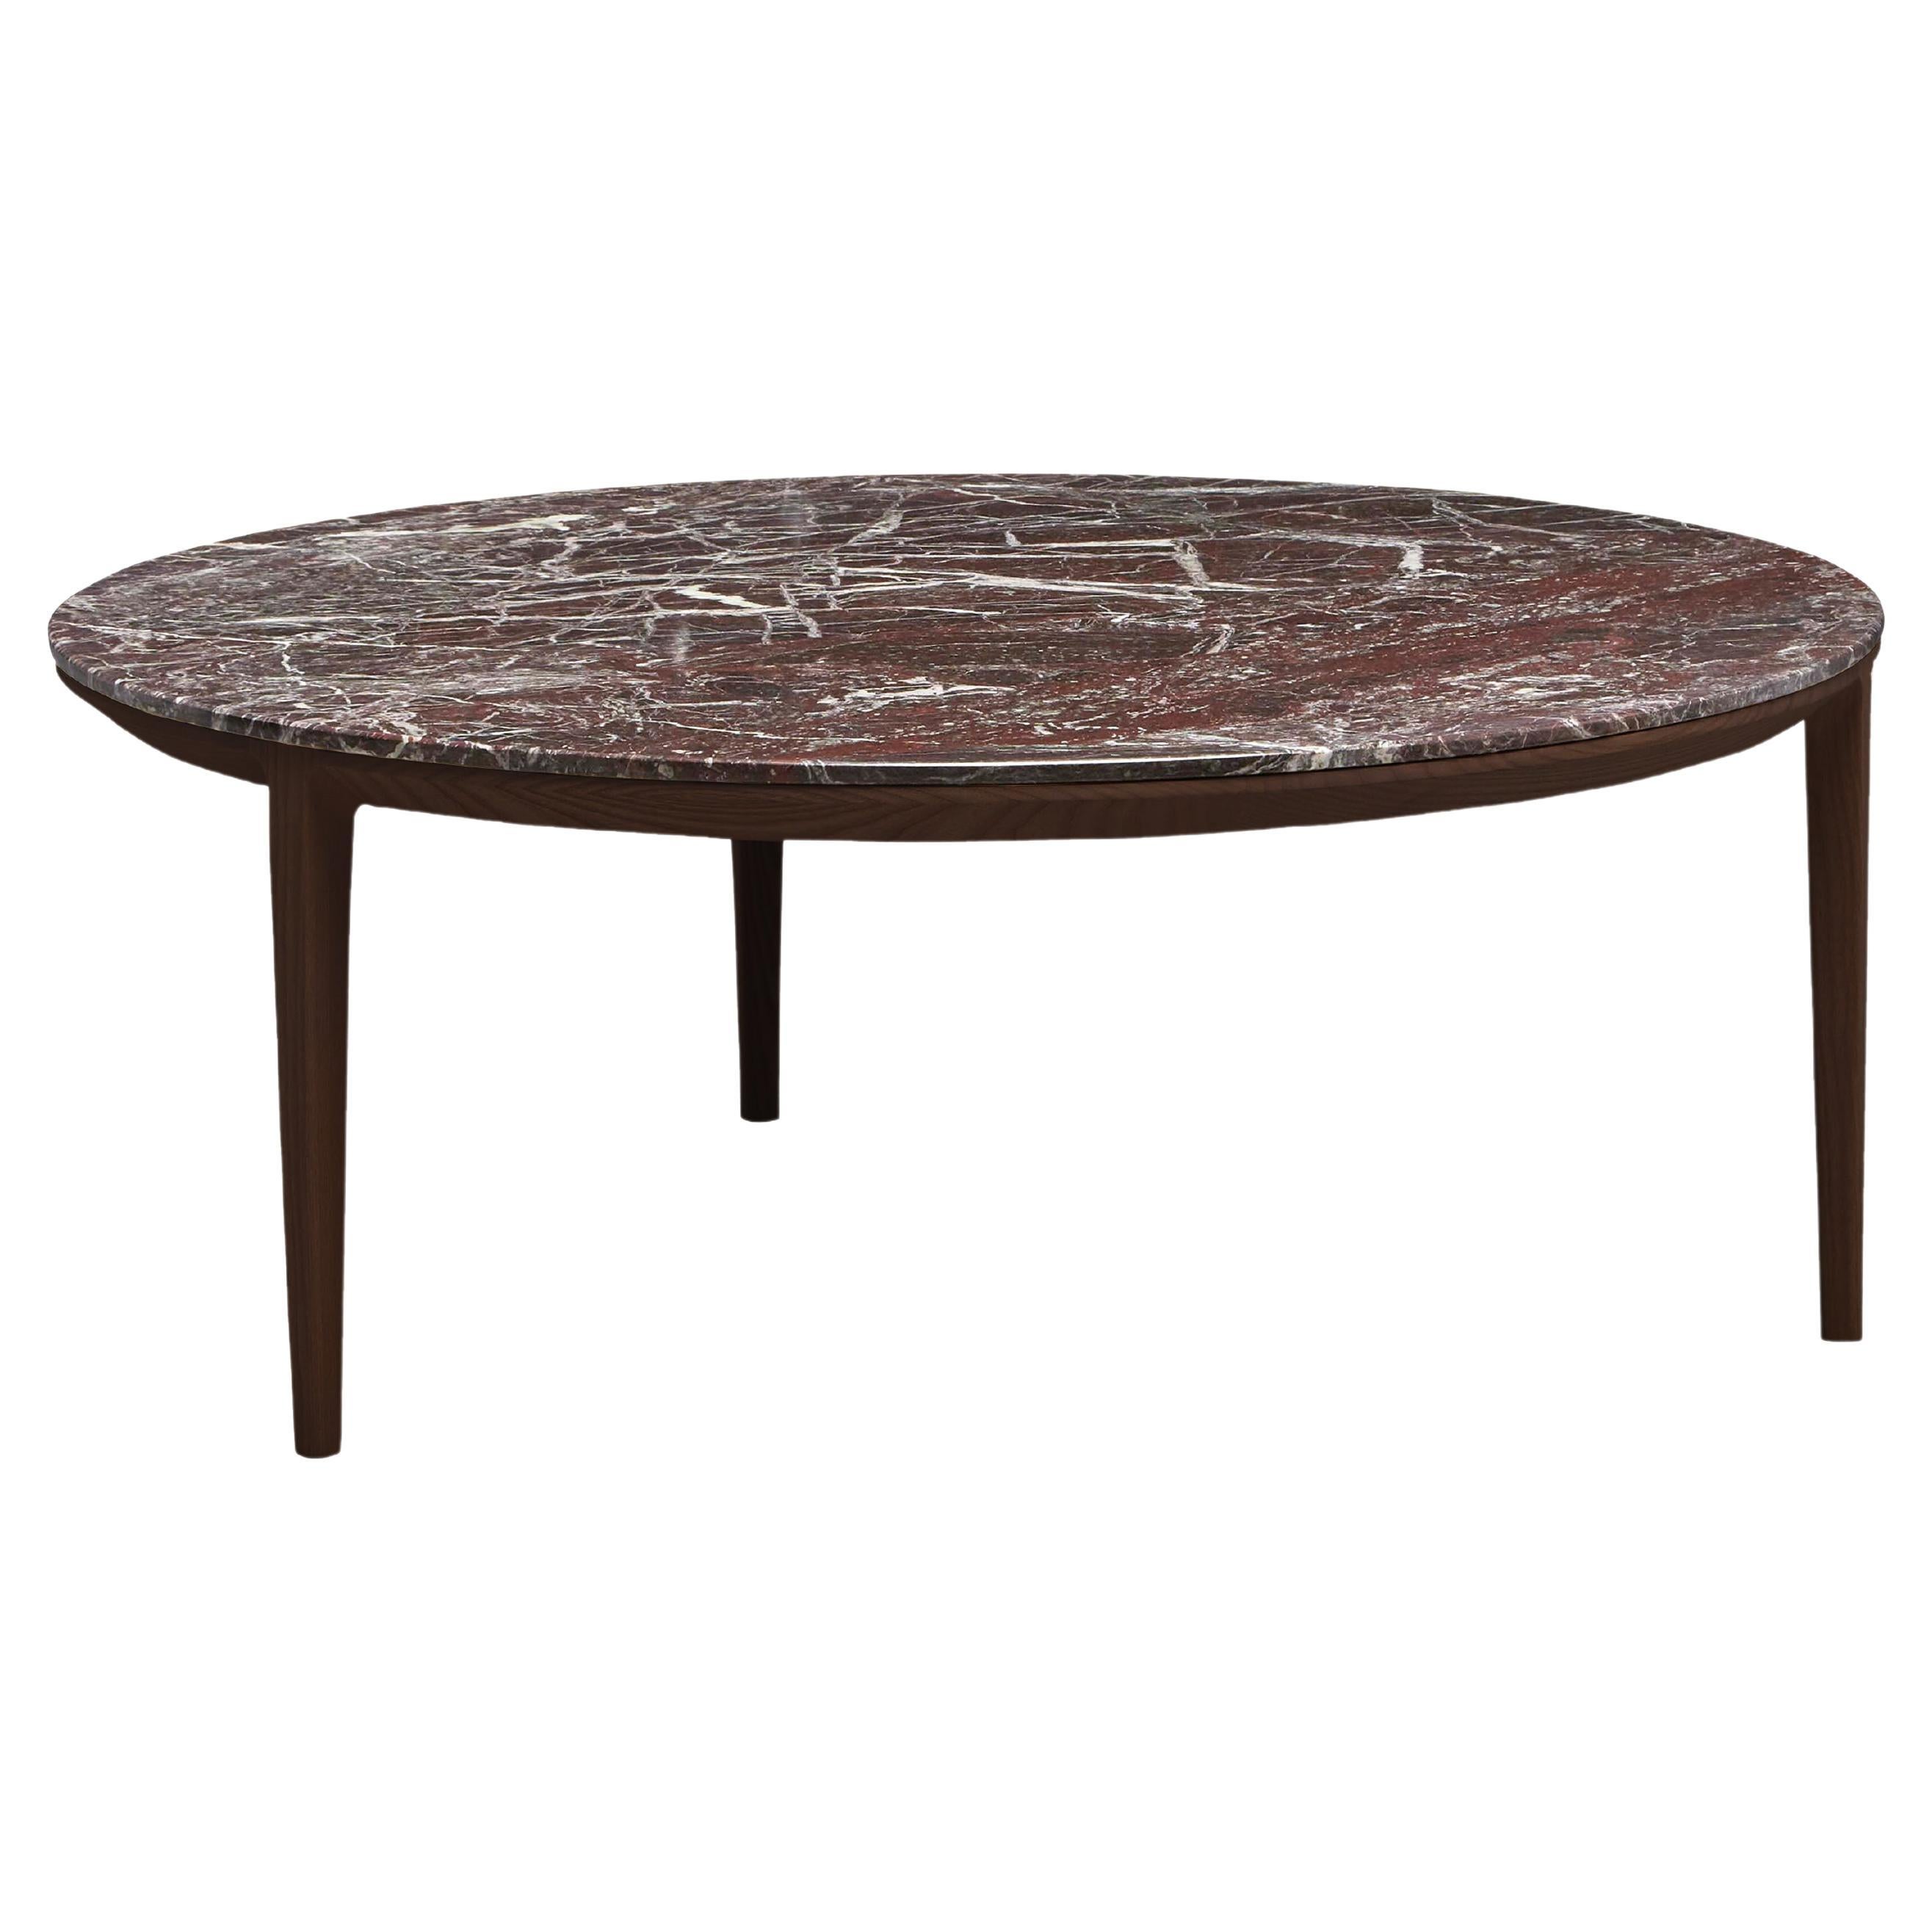 SP01 Etoile Coffee Table in Red Rosso Levanto Marble, Made in Italy